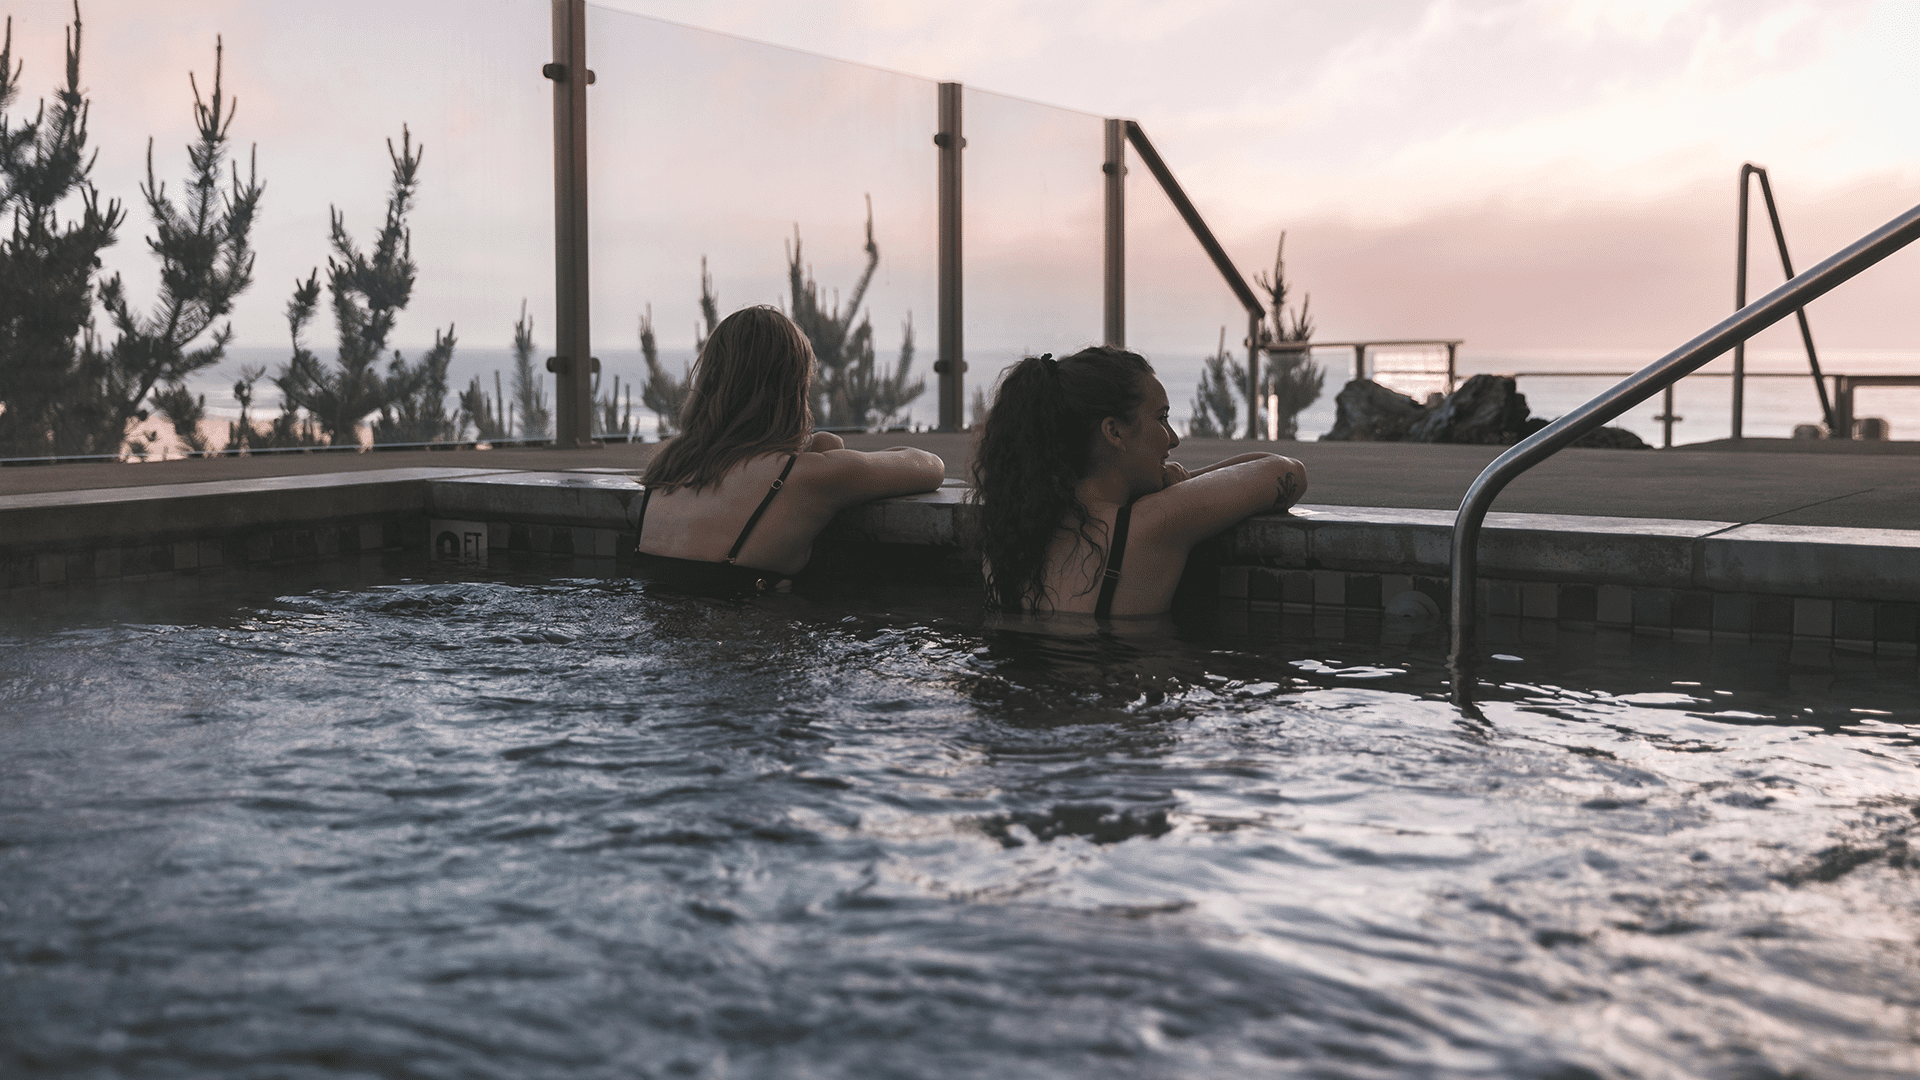 SunsetfromHotTub_0C3A6004 2